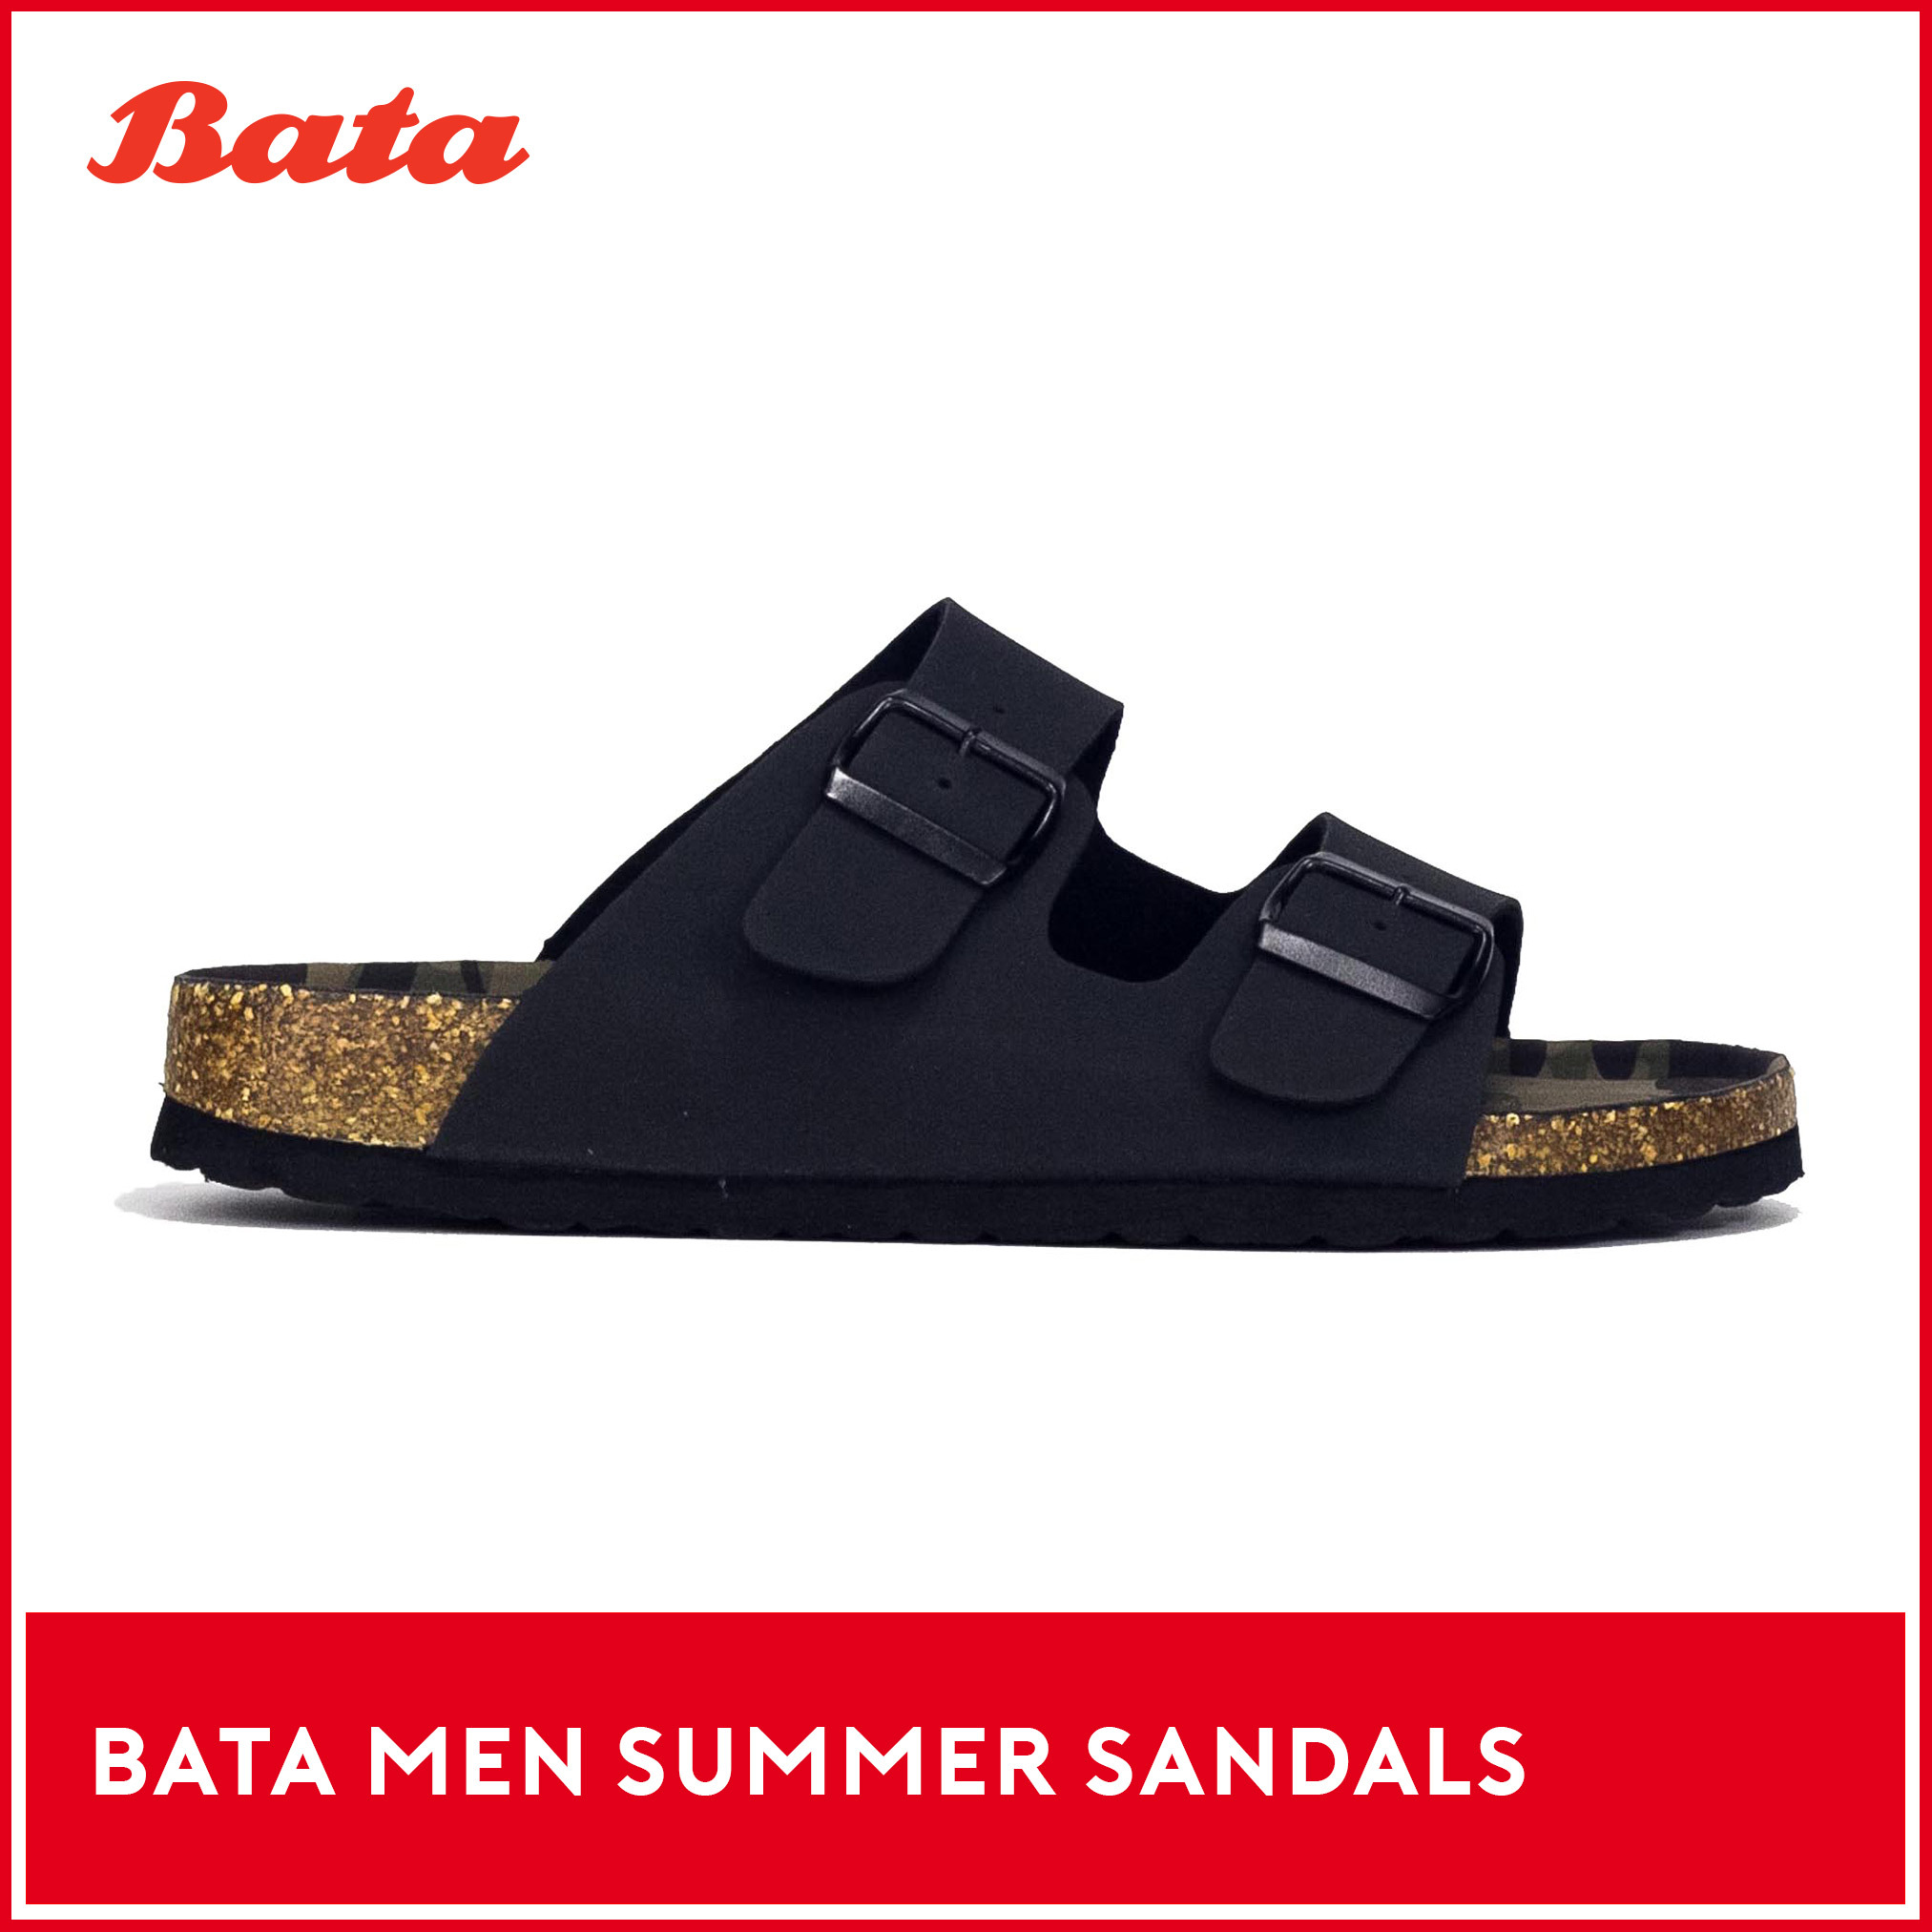 bata 9 to 5 collection price